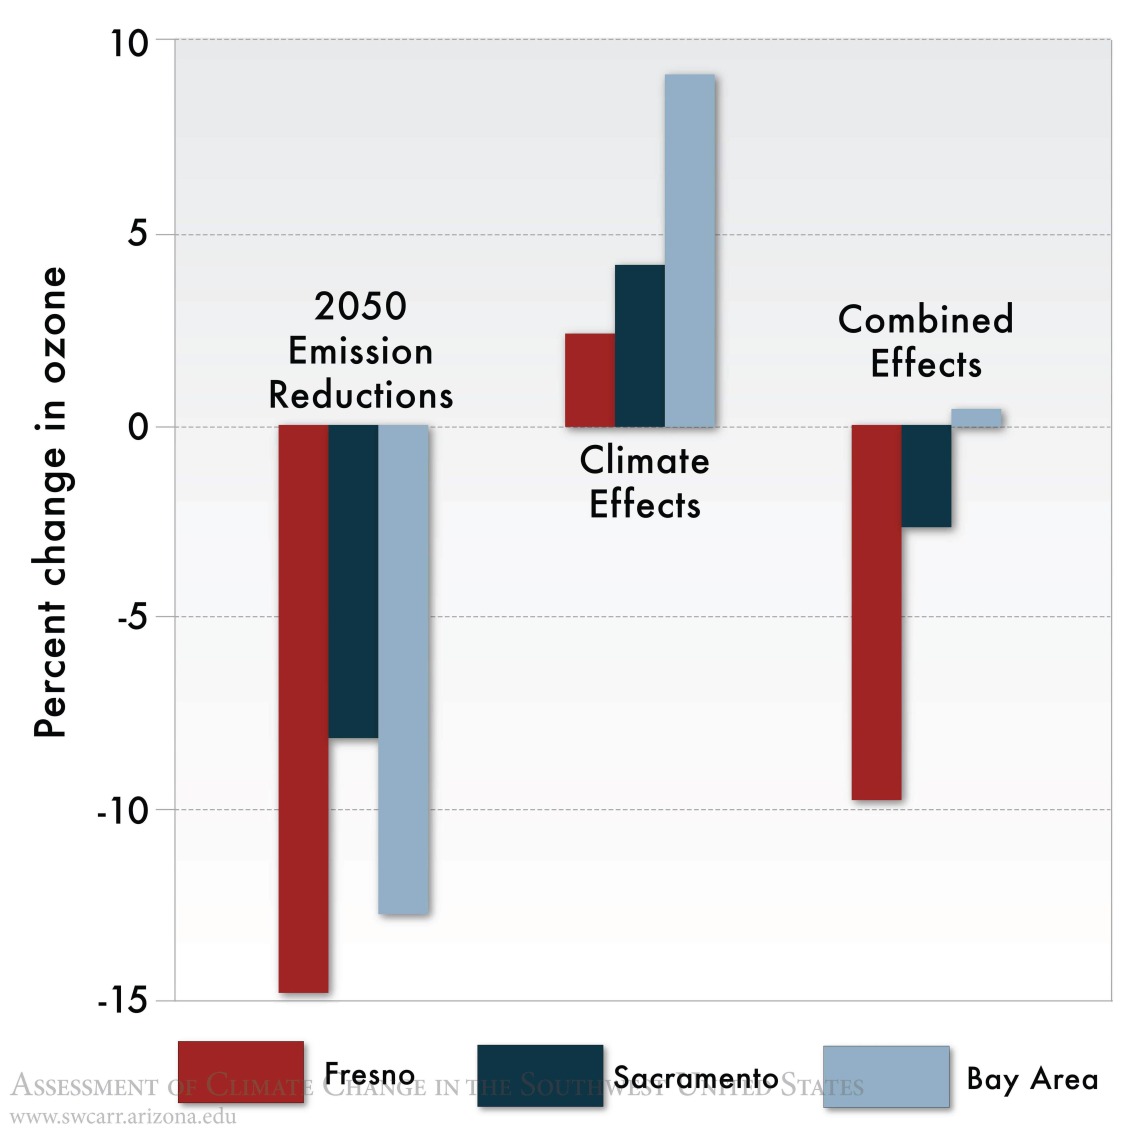 Figure 2 from Chapter 15 of Climate Assessment Report.